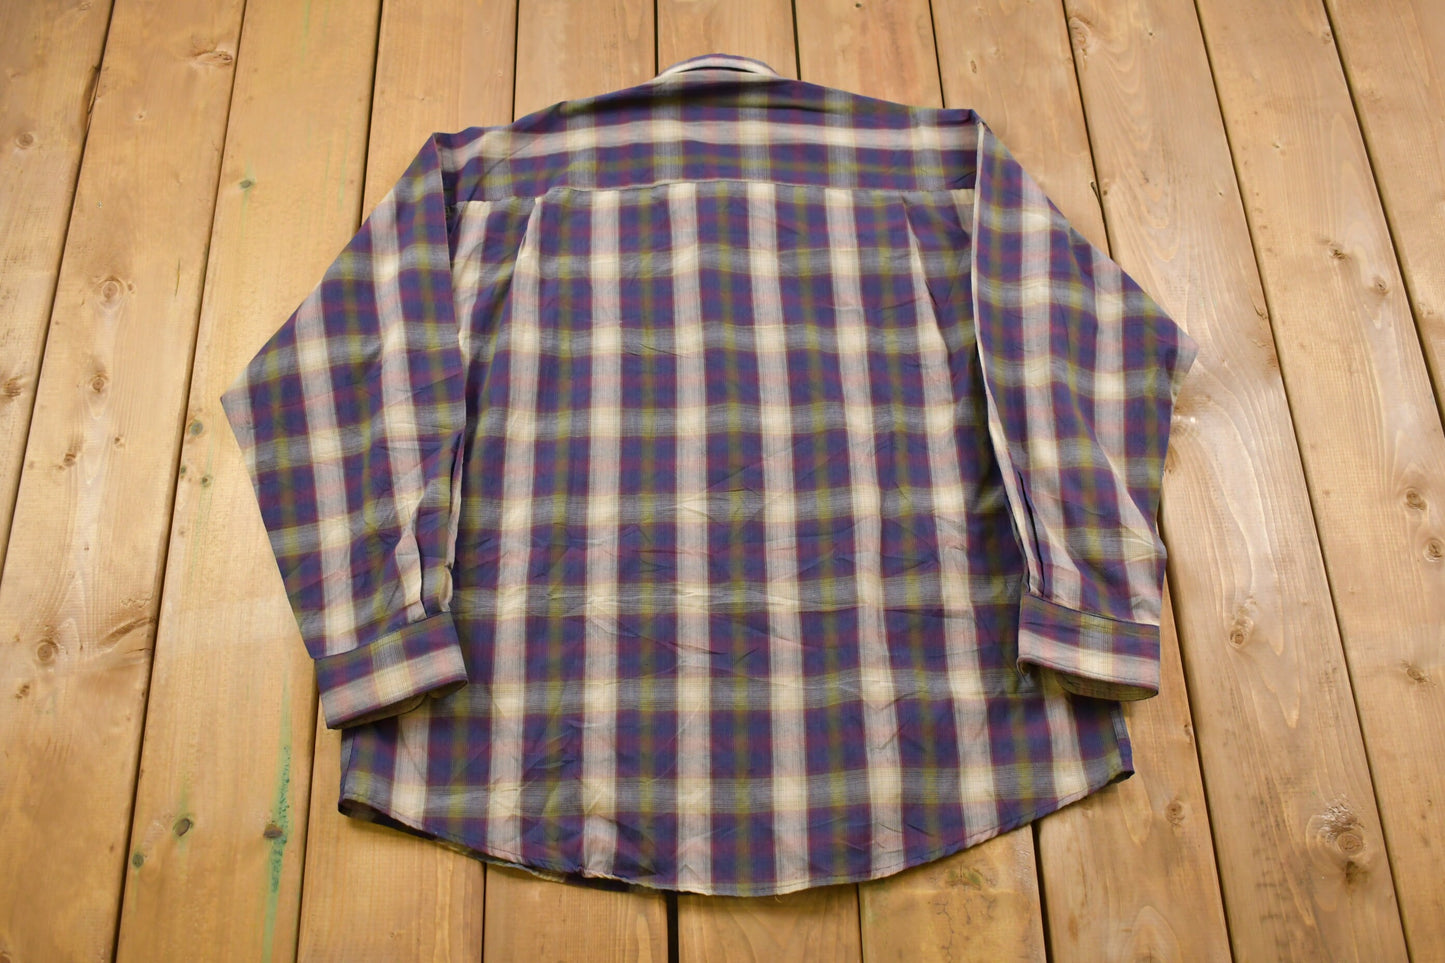 Vintage 1990s Natural Issue Plaid Button Up Shirt / 1990s Button Up / Vintage Flannel / Casual Wear / Workwear / Pattern Button Up